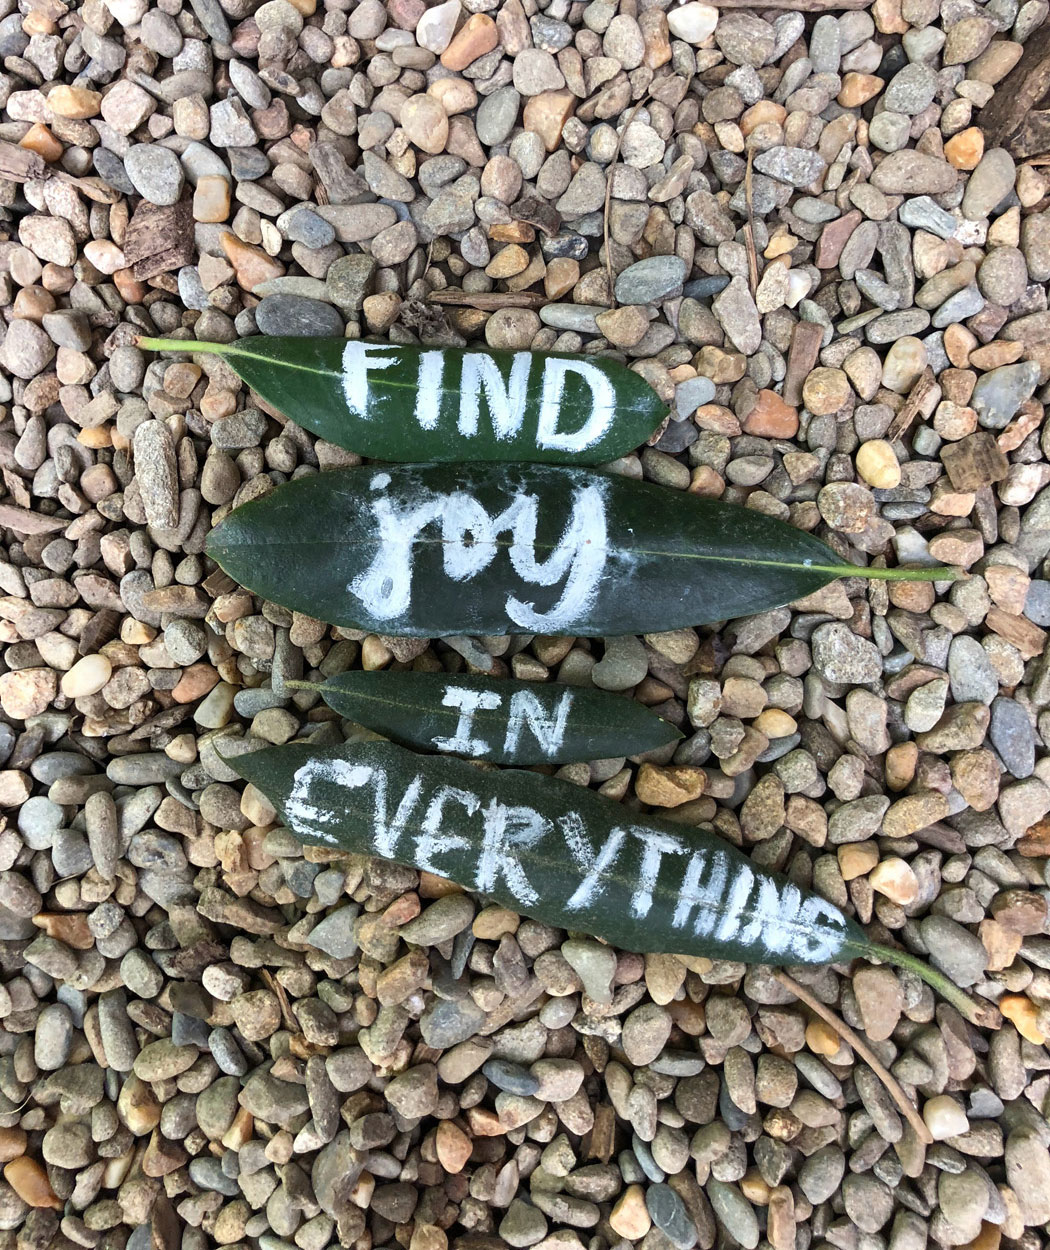 Find joy in everything painted leaves on gravel